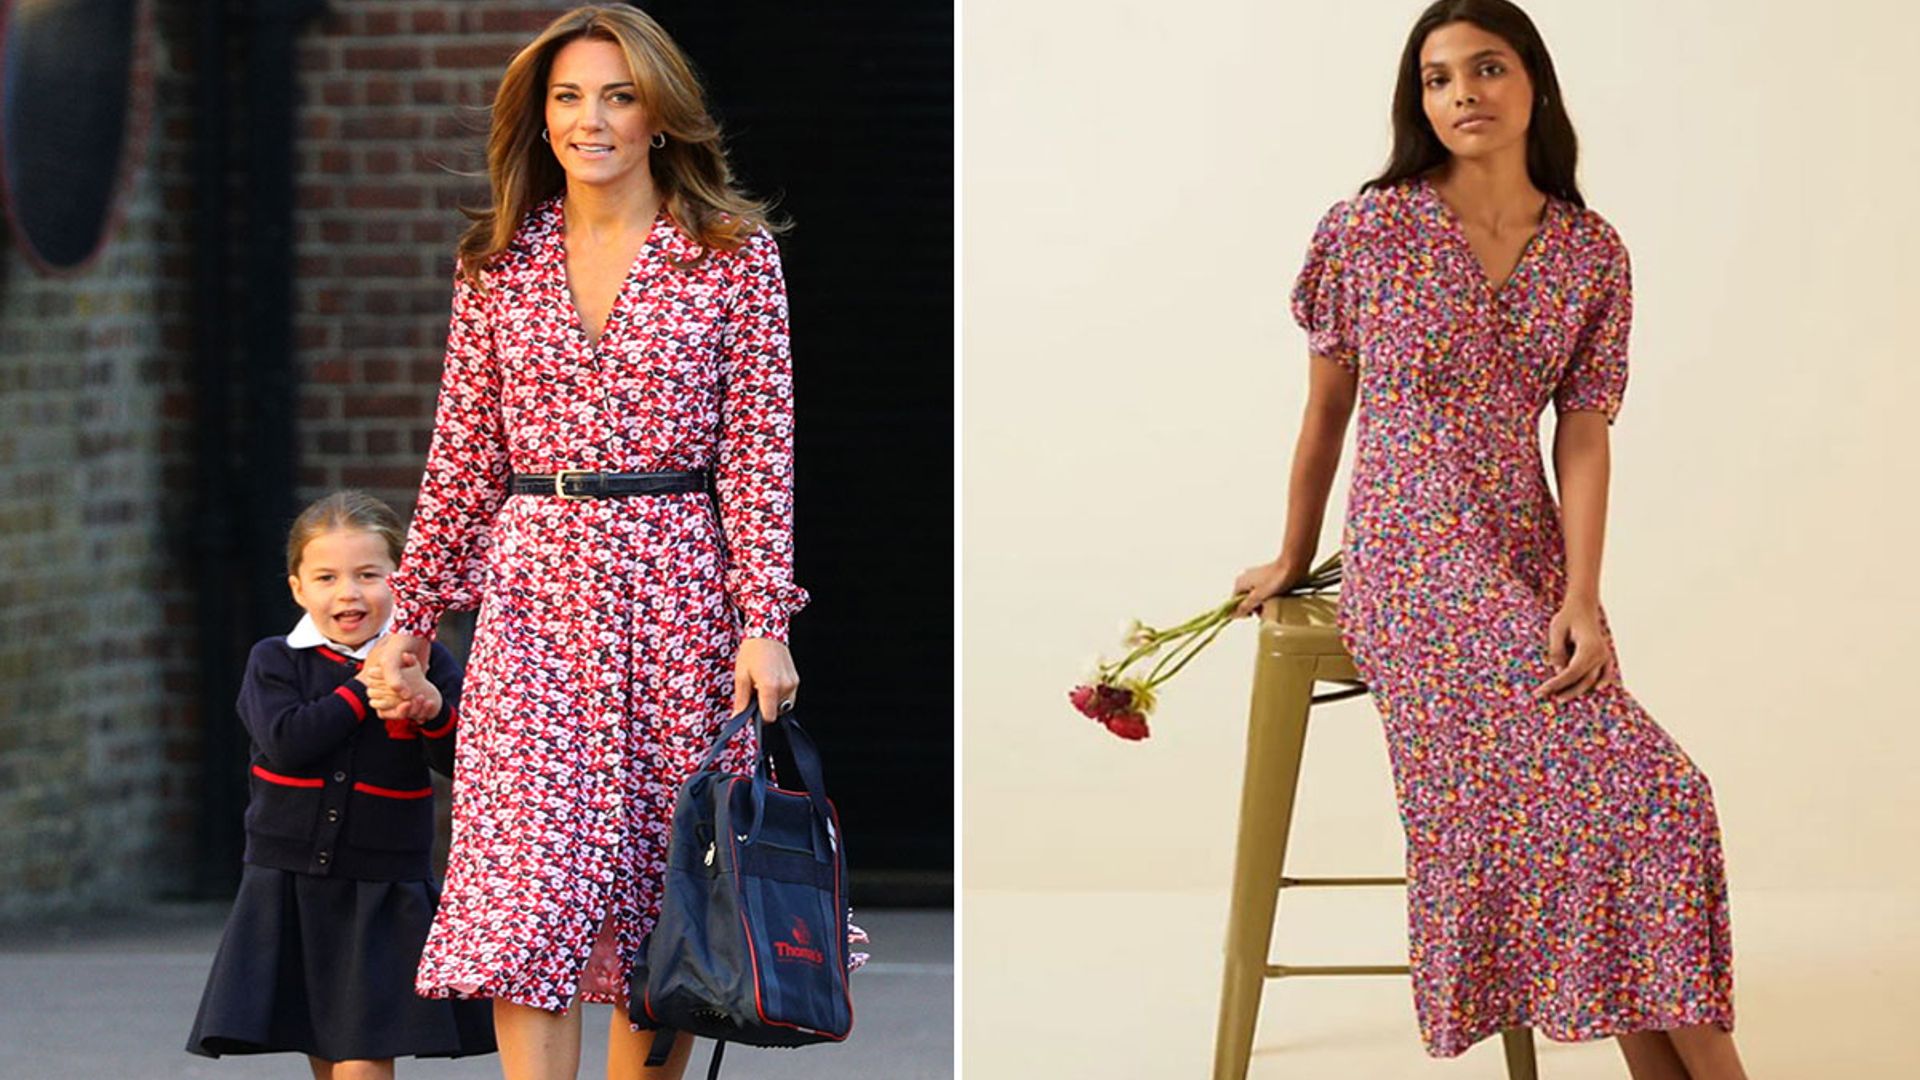 Kate Middleton rewears gorgeous 2400 Michael Kors coat on outing with  Prince William  MyLondon